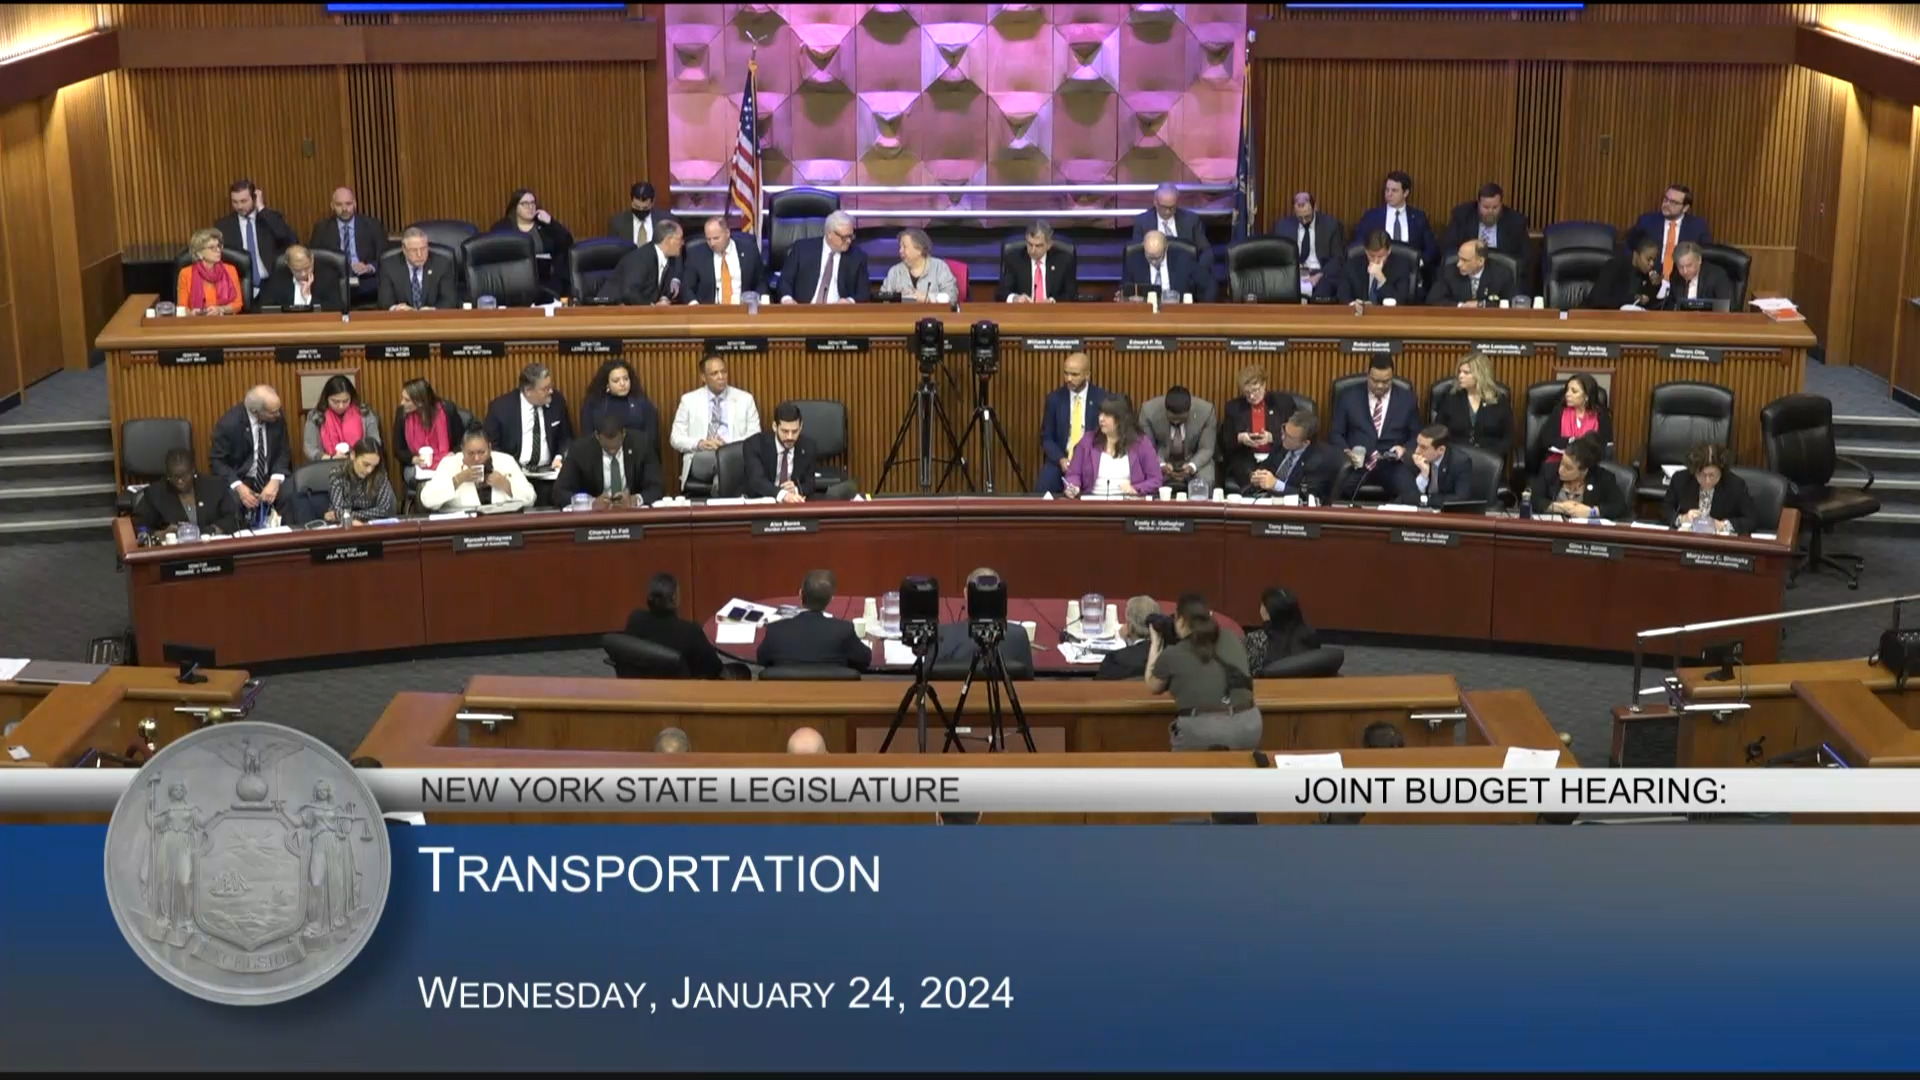 MTA Chairman Testifies During Joint Budget Hearing on Transportation